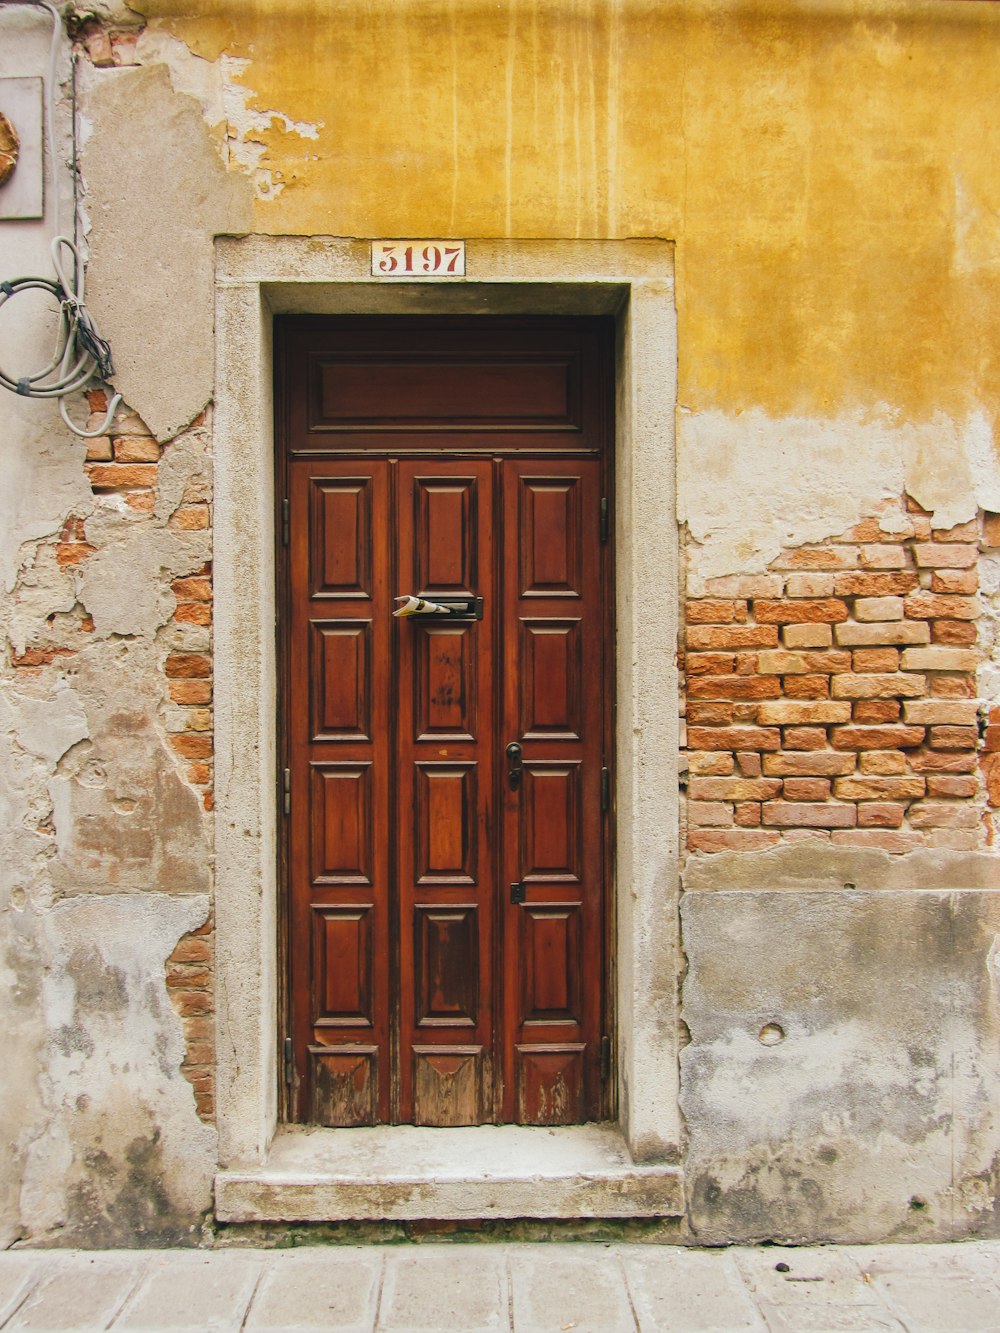 a wooden door in an old building with a brick wall